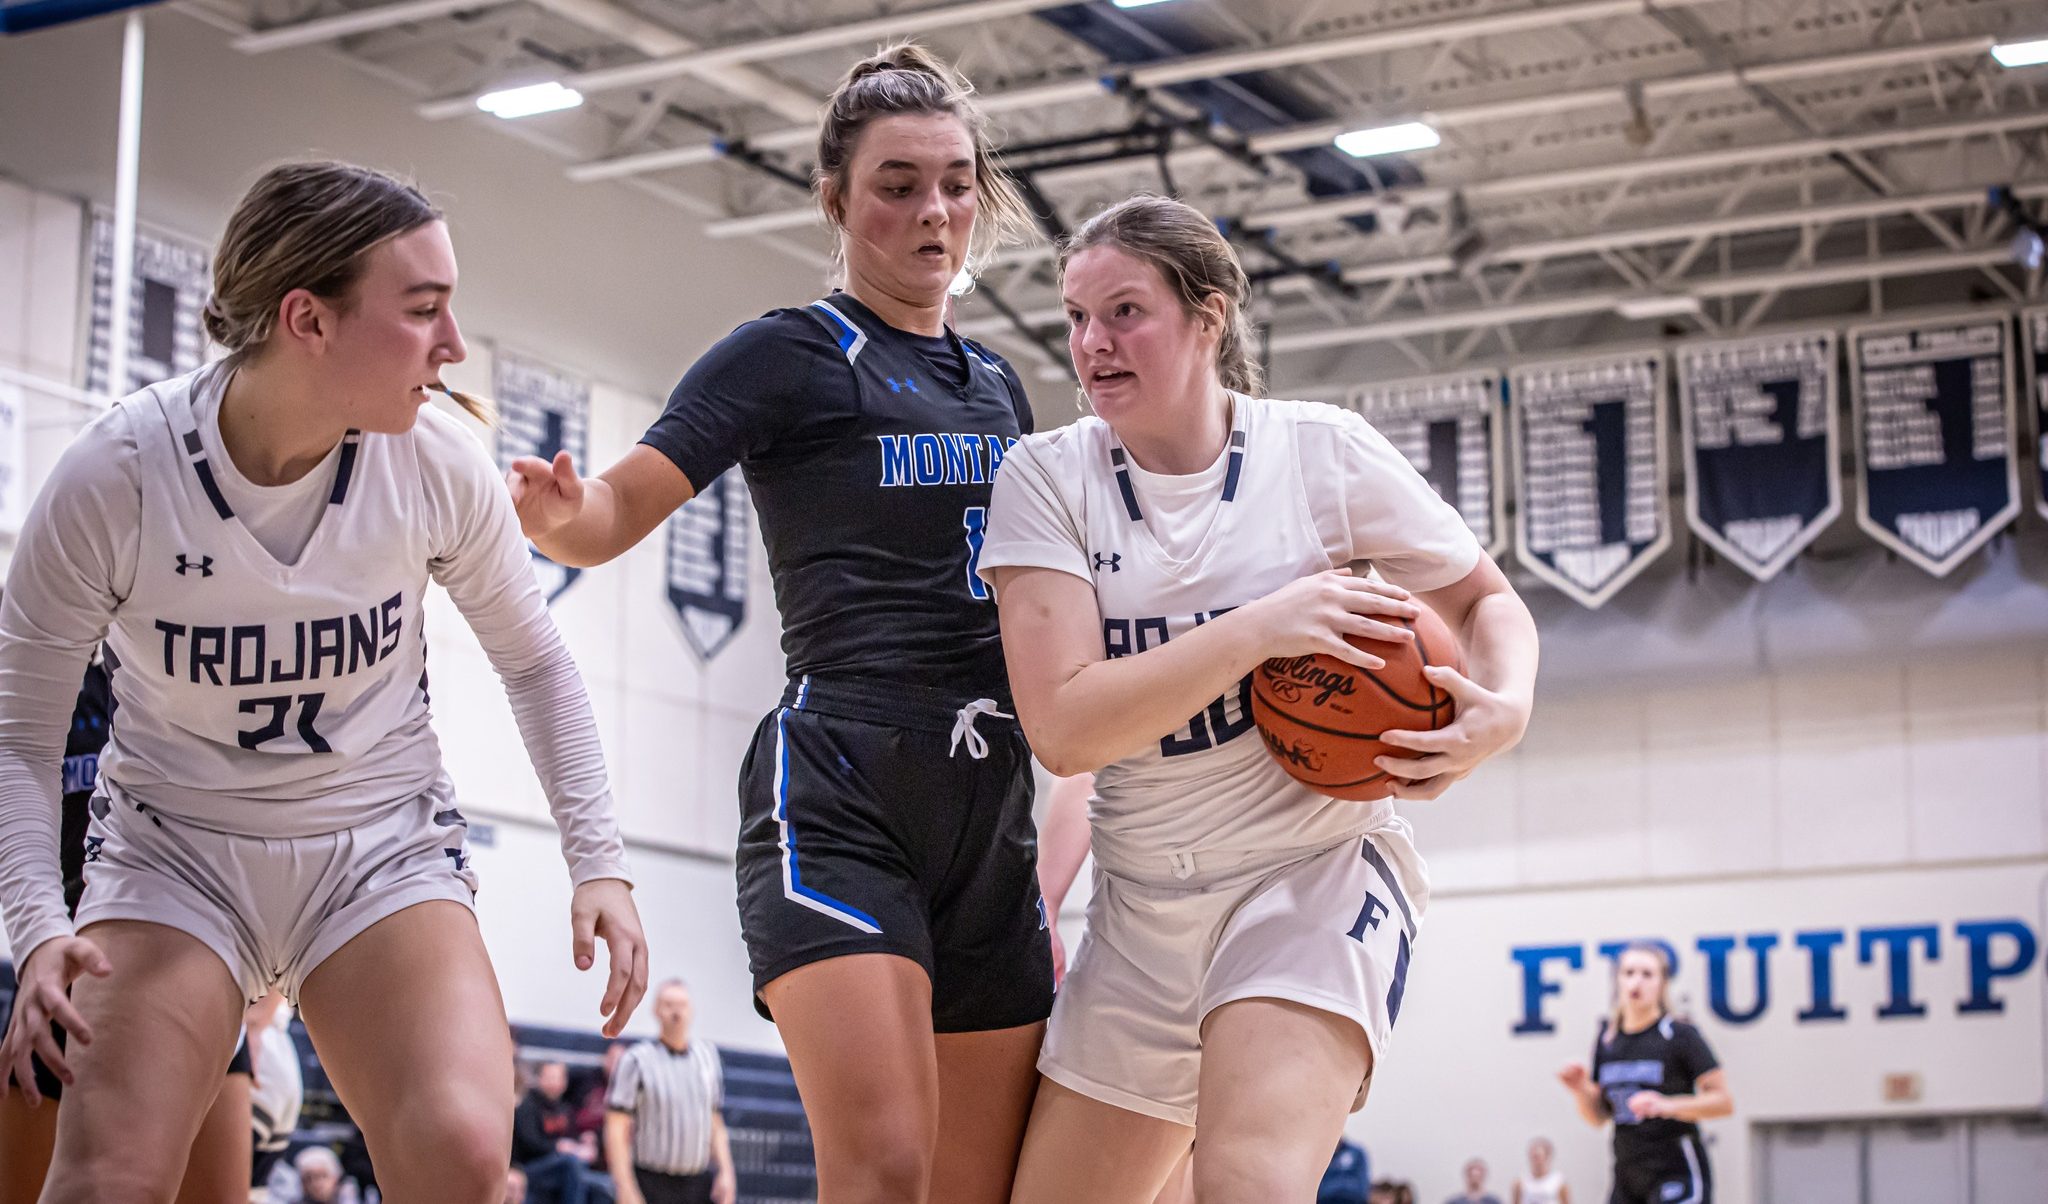 Fruitport claims another victory, this time over Montague in Division 2 district semifinal